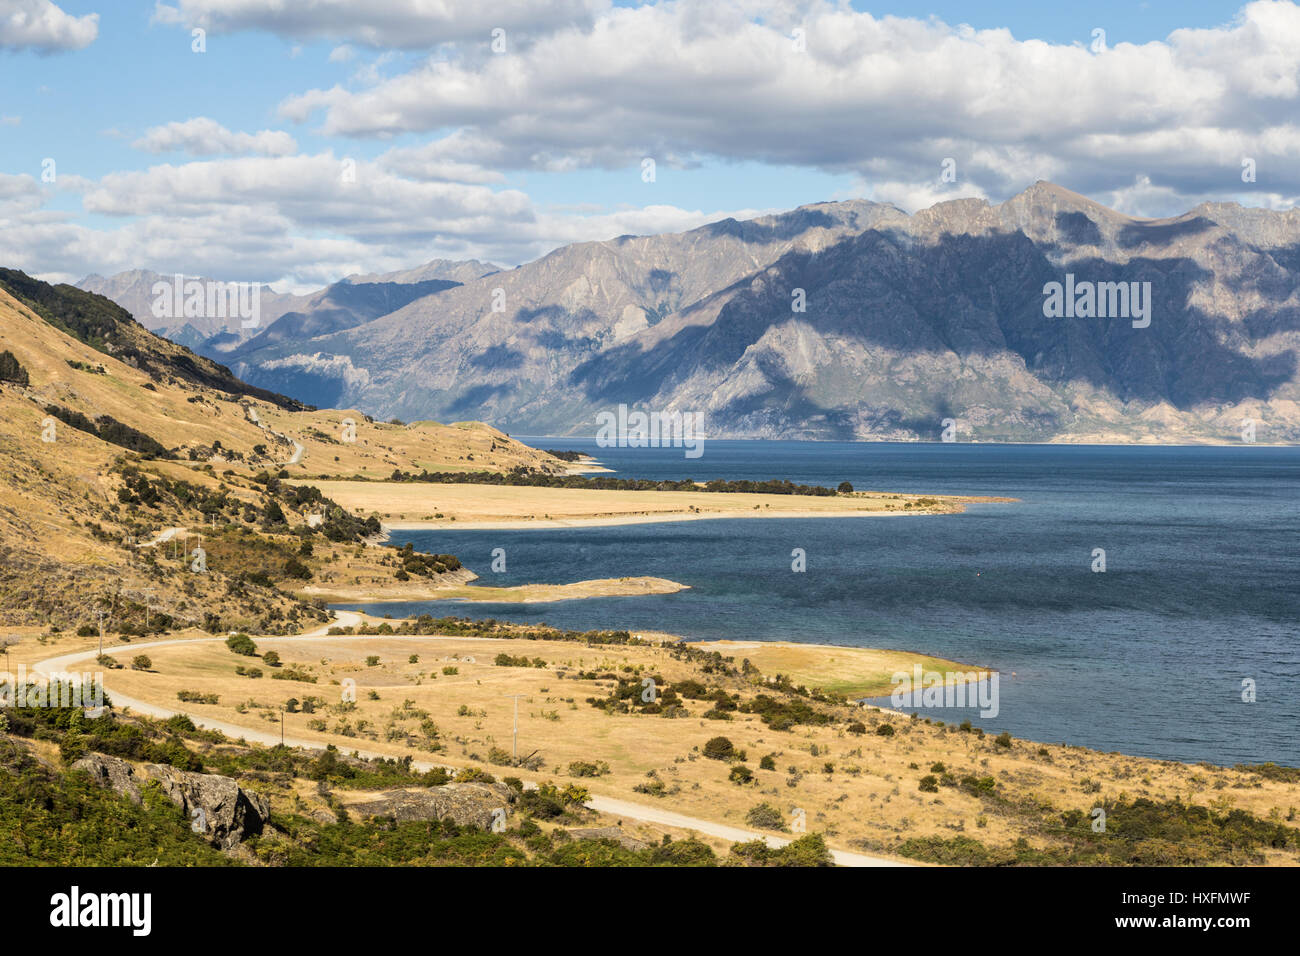 Stunning lake Hawea from viewpoint near the tourism town of Wanaka in Canterbury district of New Zealand south island. Stock Photo